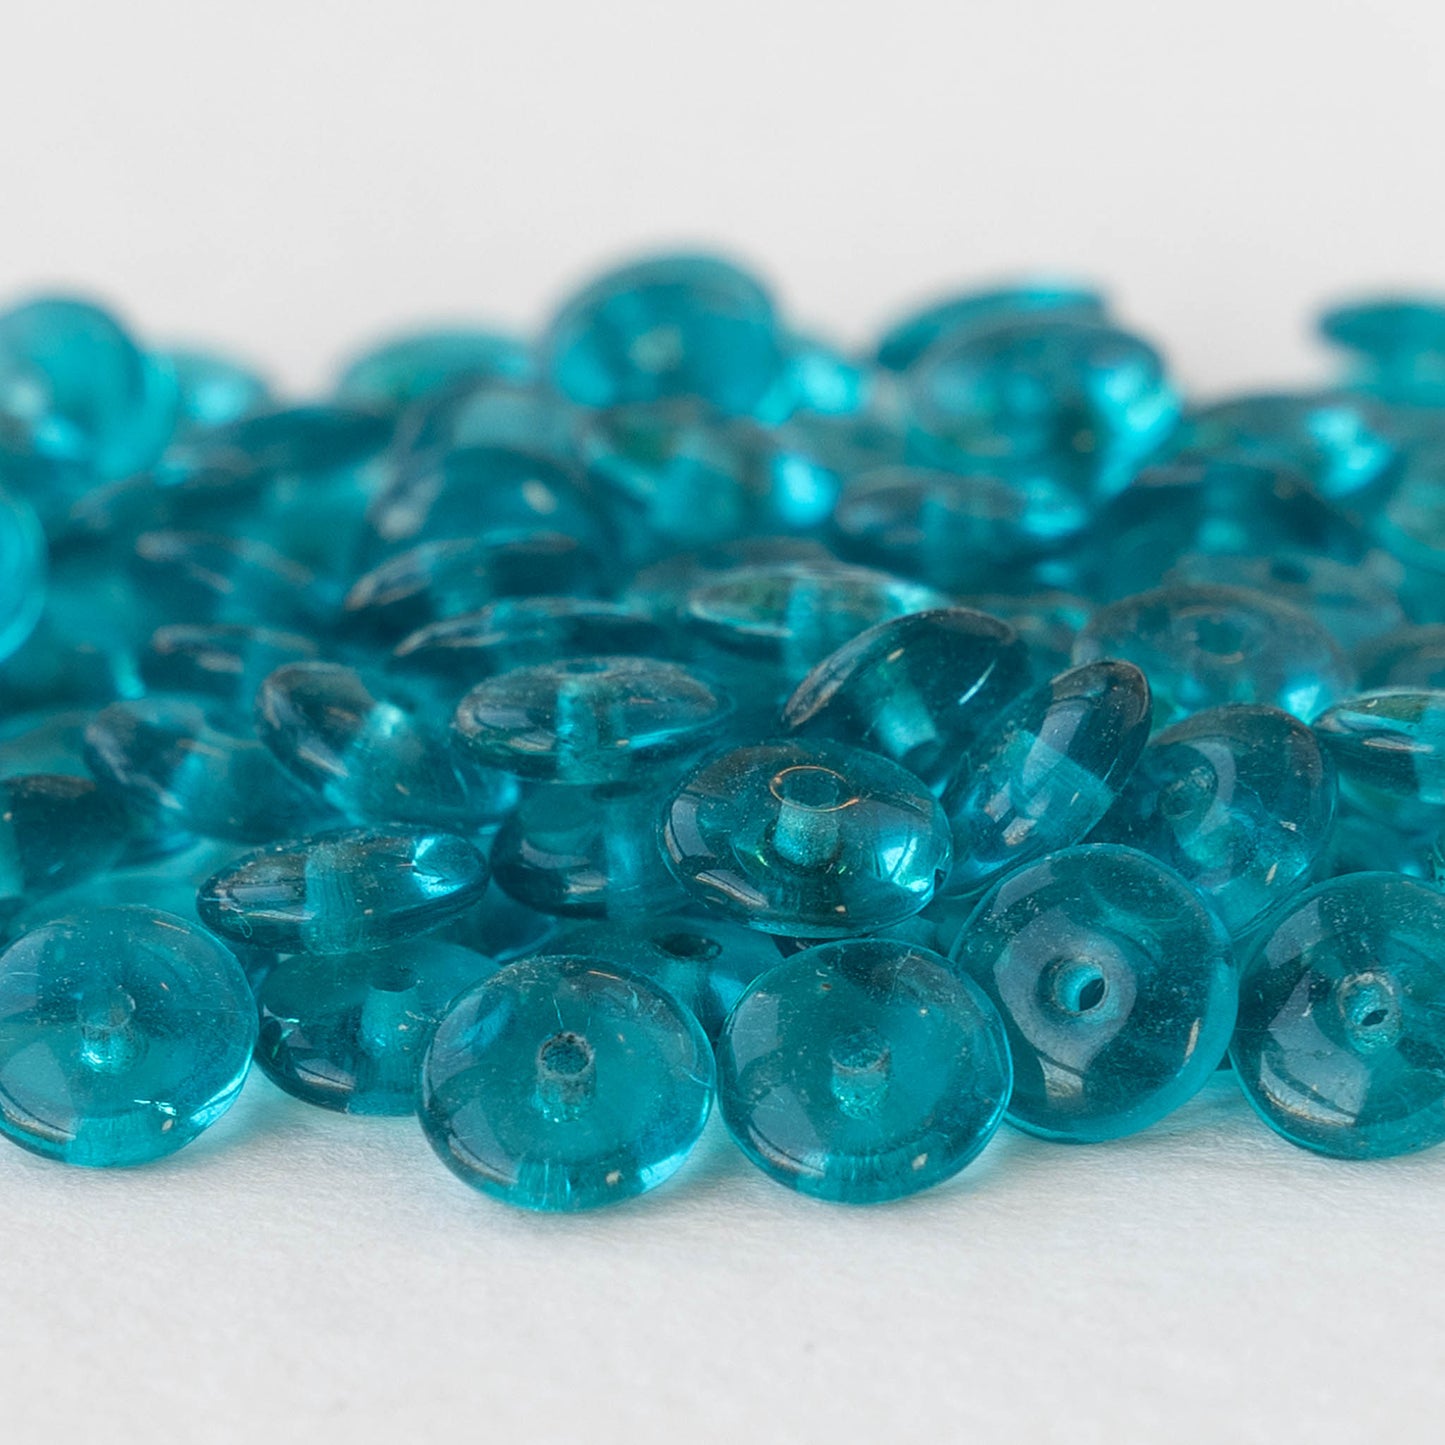 7mm Rondelle Beads - Teal - 100 Beads